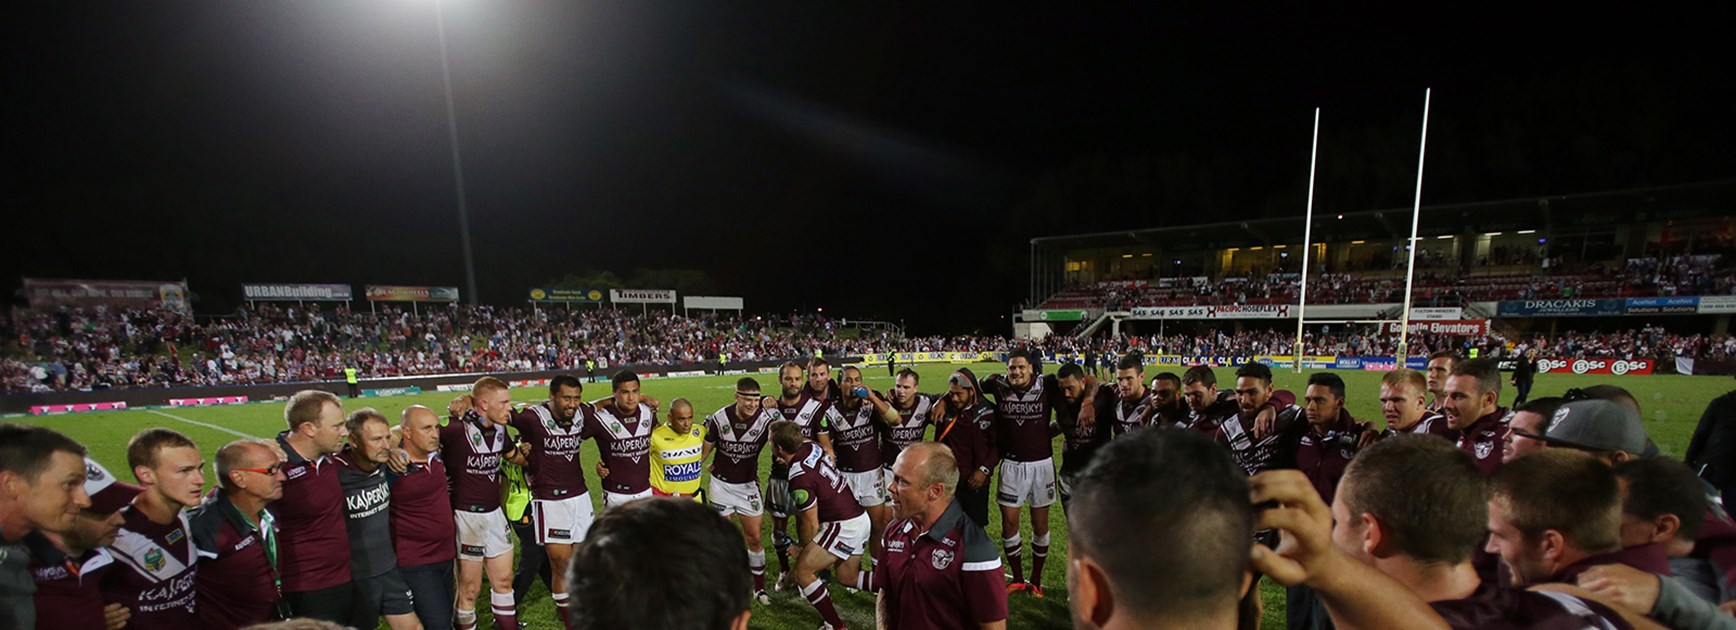 Manly at Brookvale Oval are a totally different proposition according to Des Hasler.